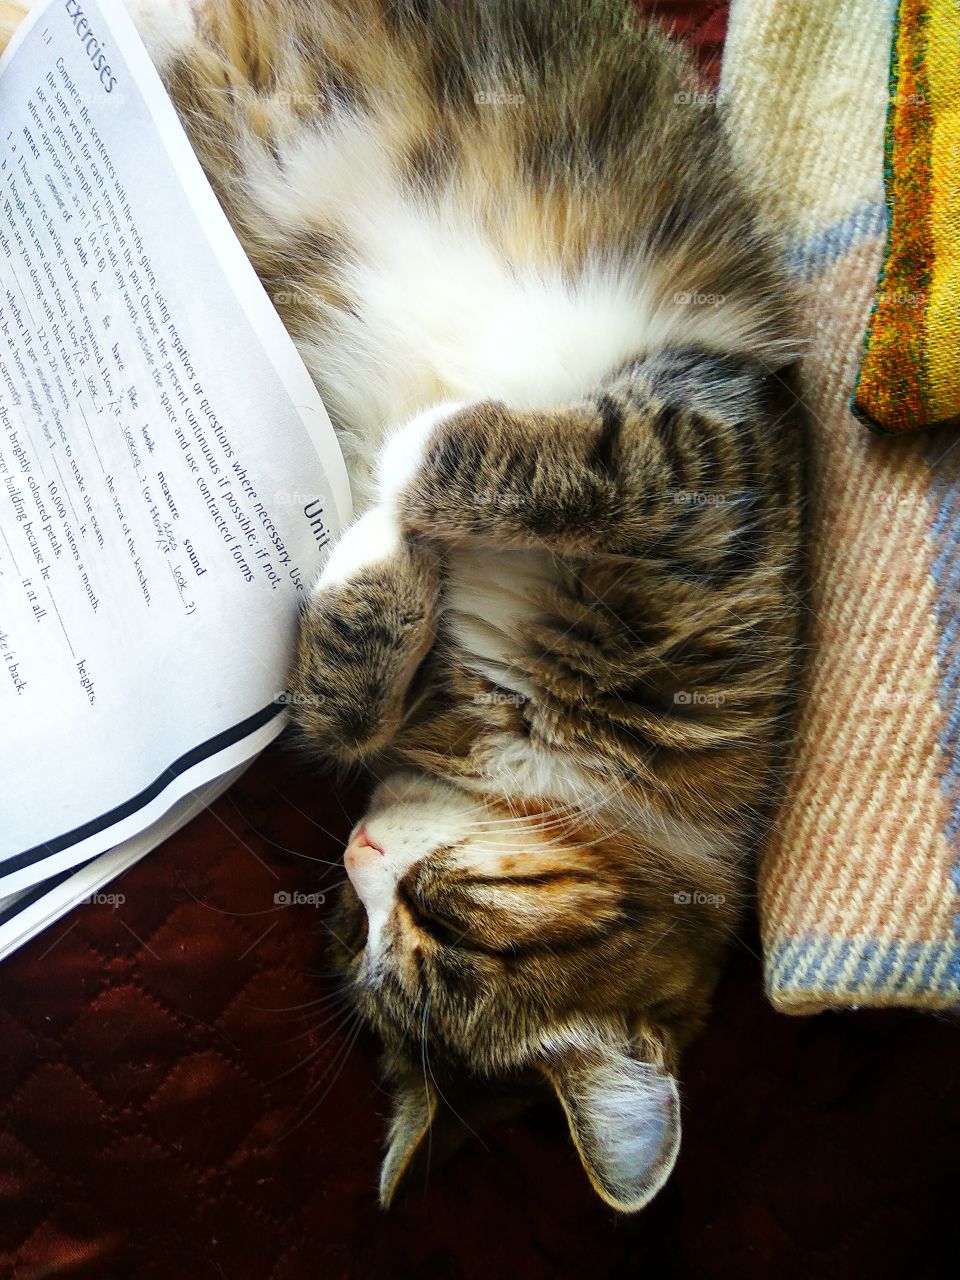 Cute cat taking a nap on language exercise book